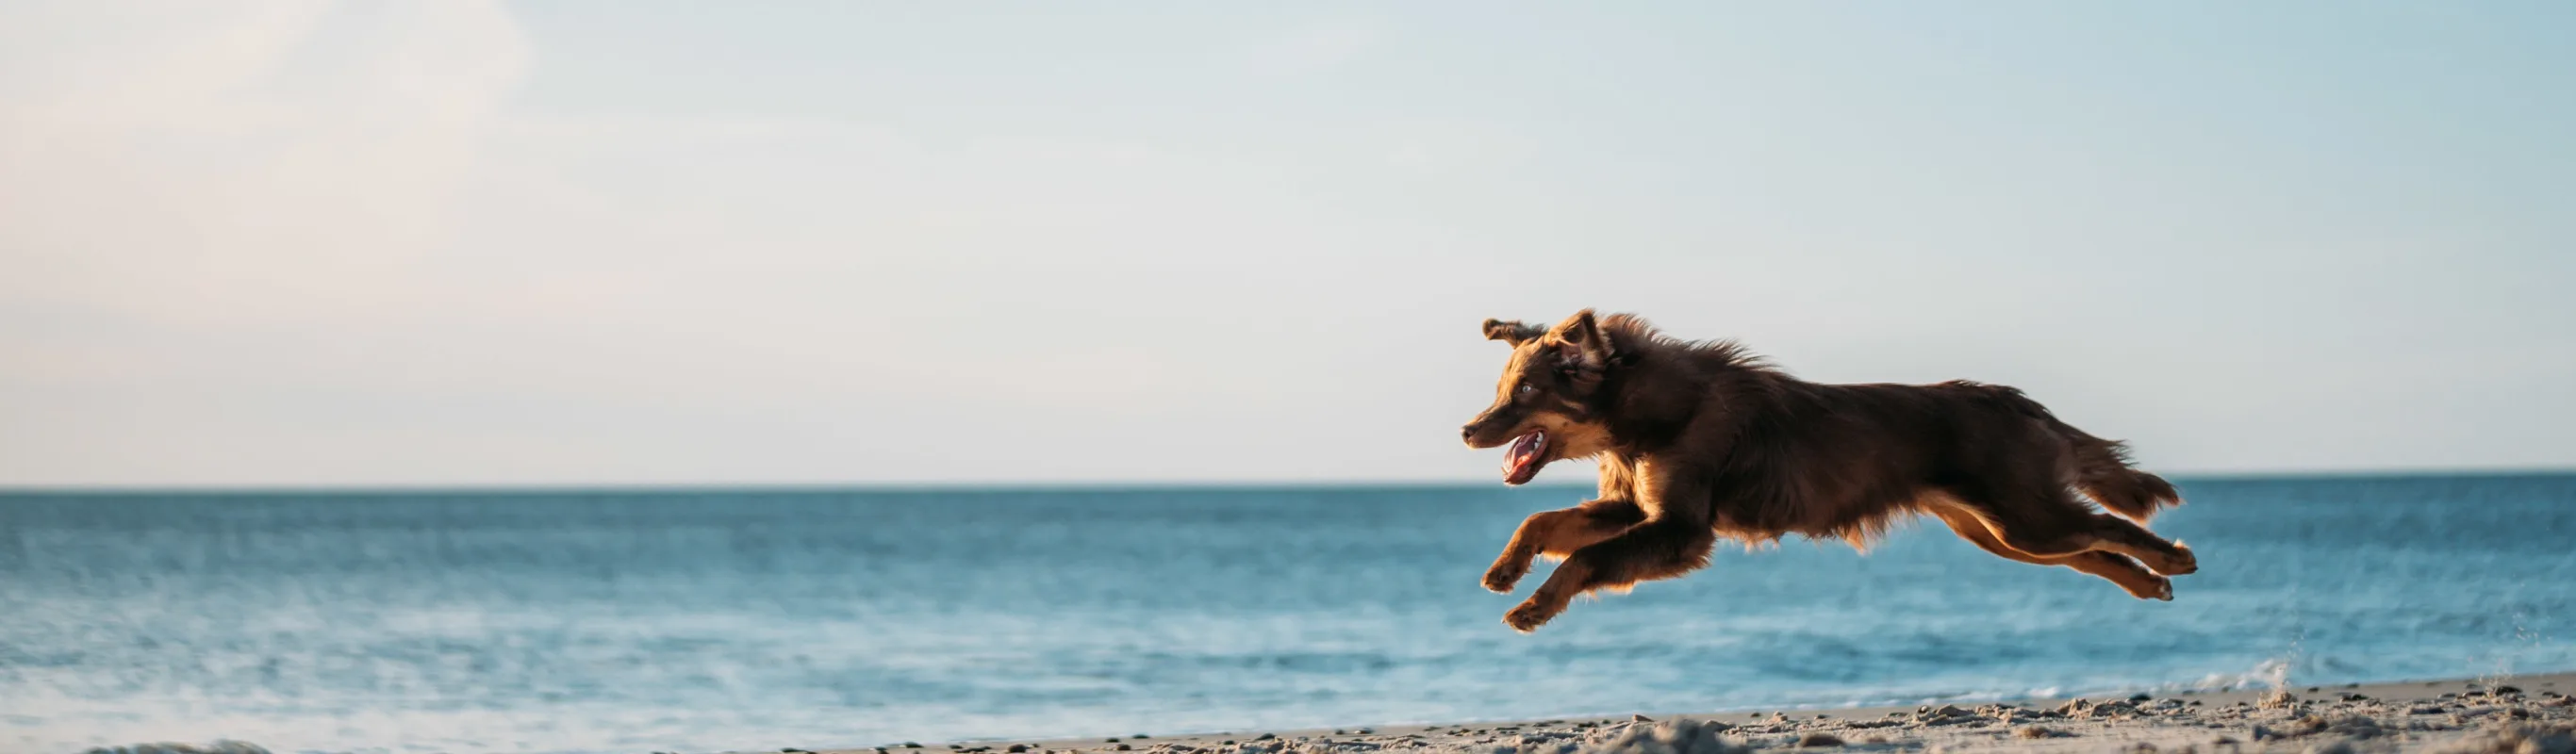 dog leaping at the beach